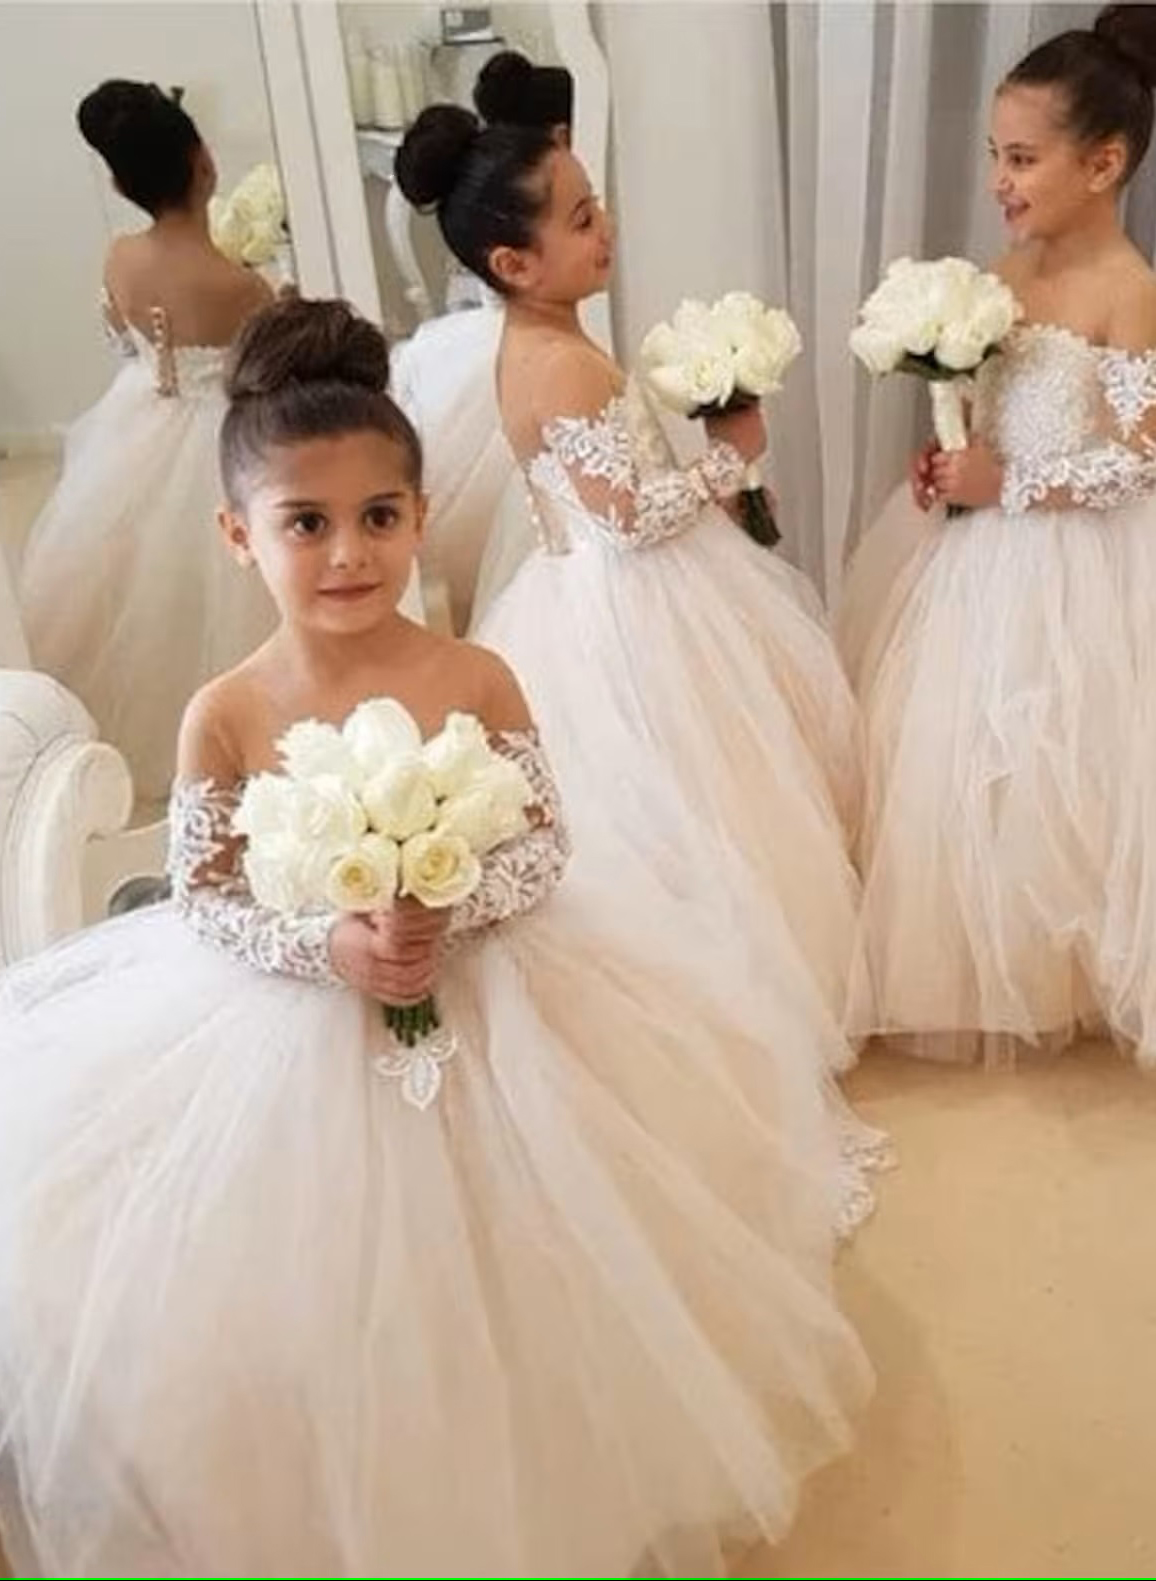 Ball Gown Princess Lace Tulle Flower Girl Dresses 